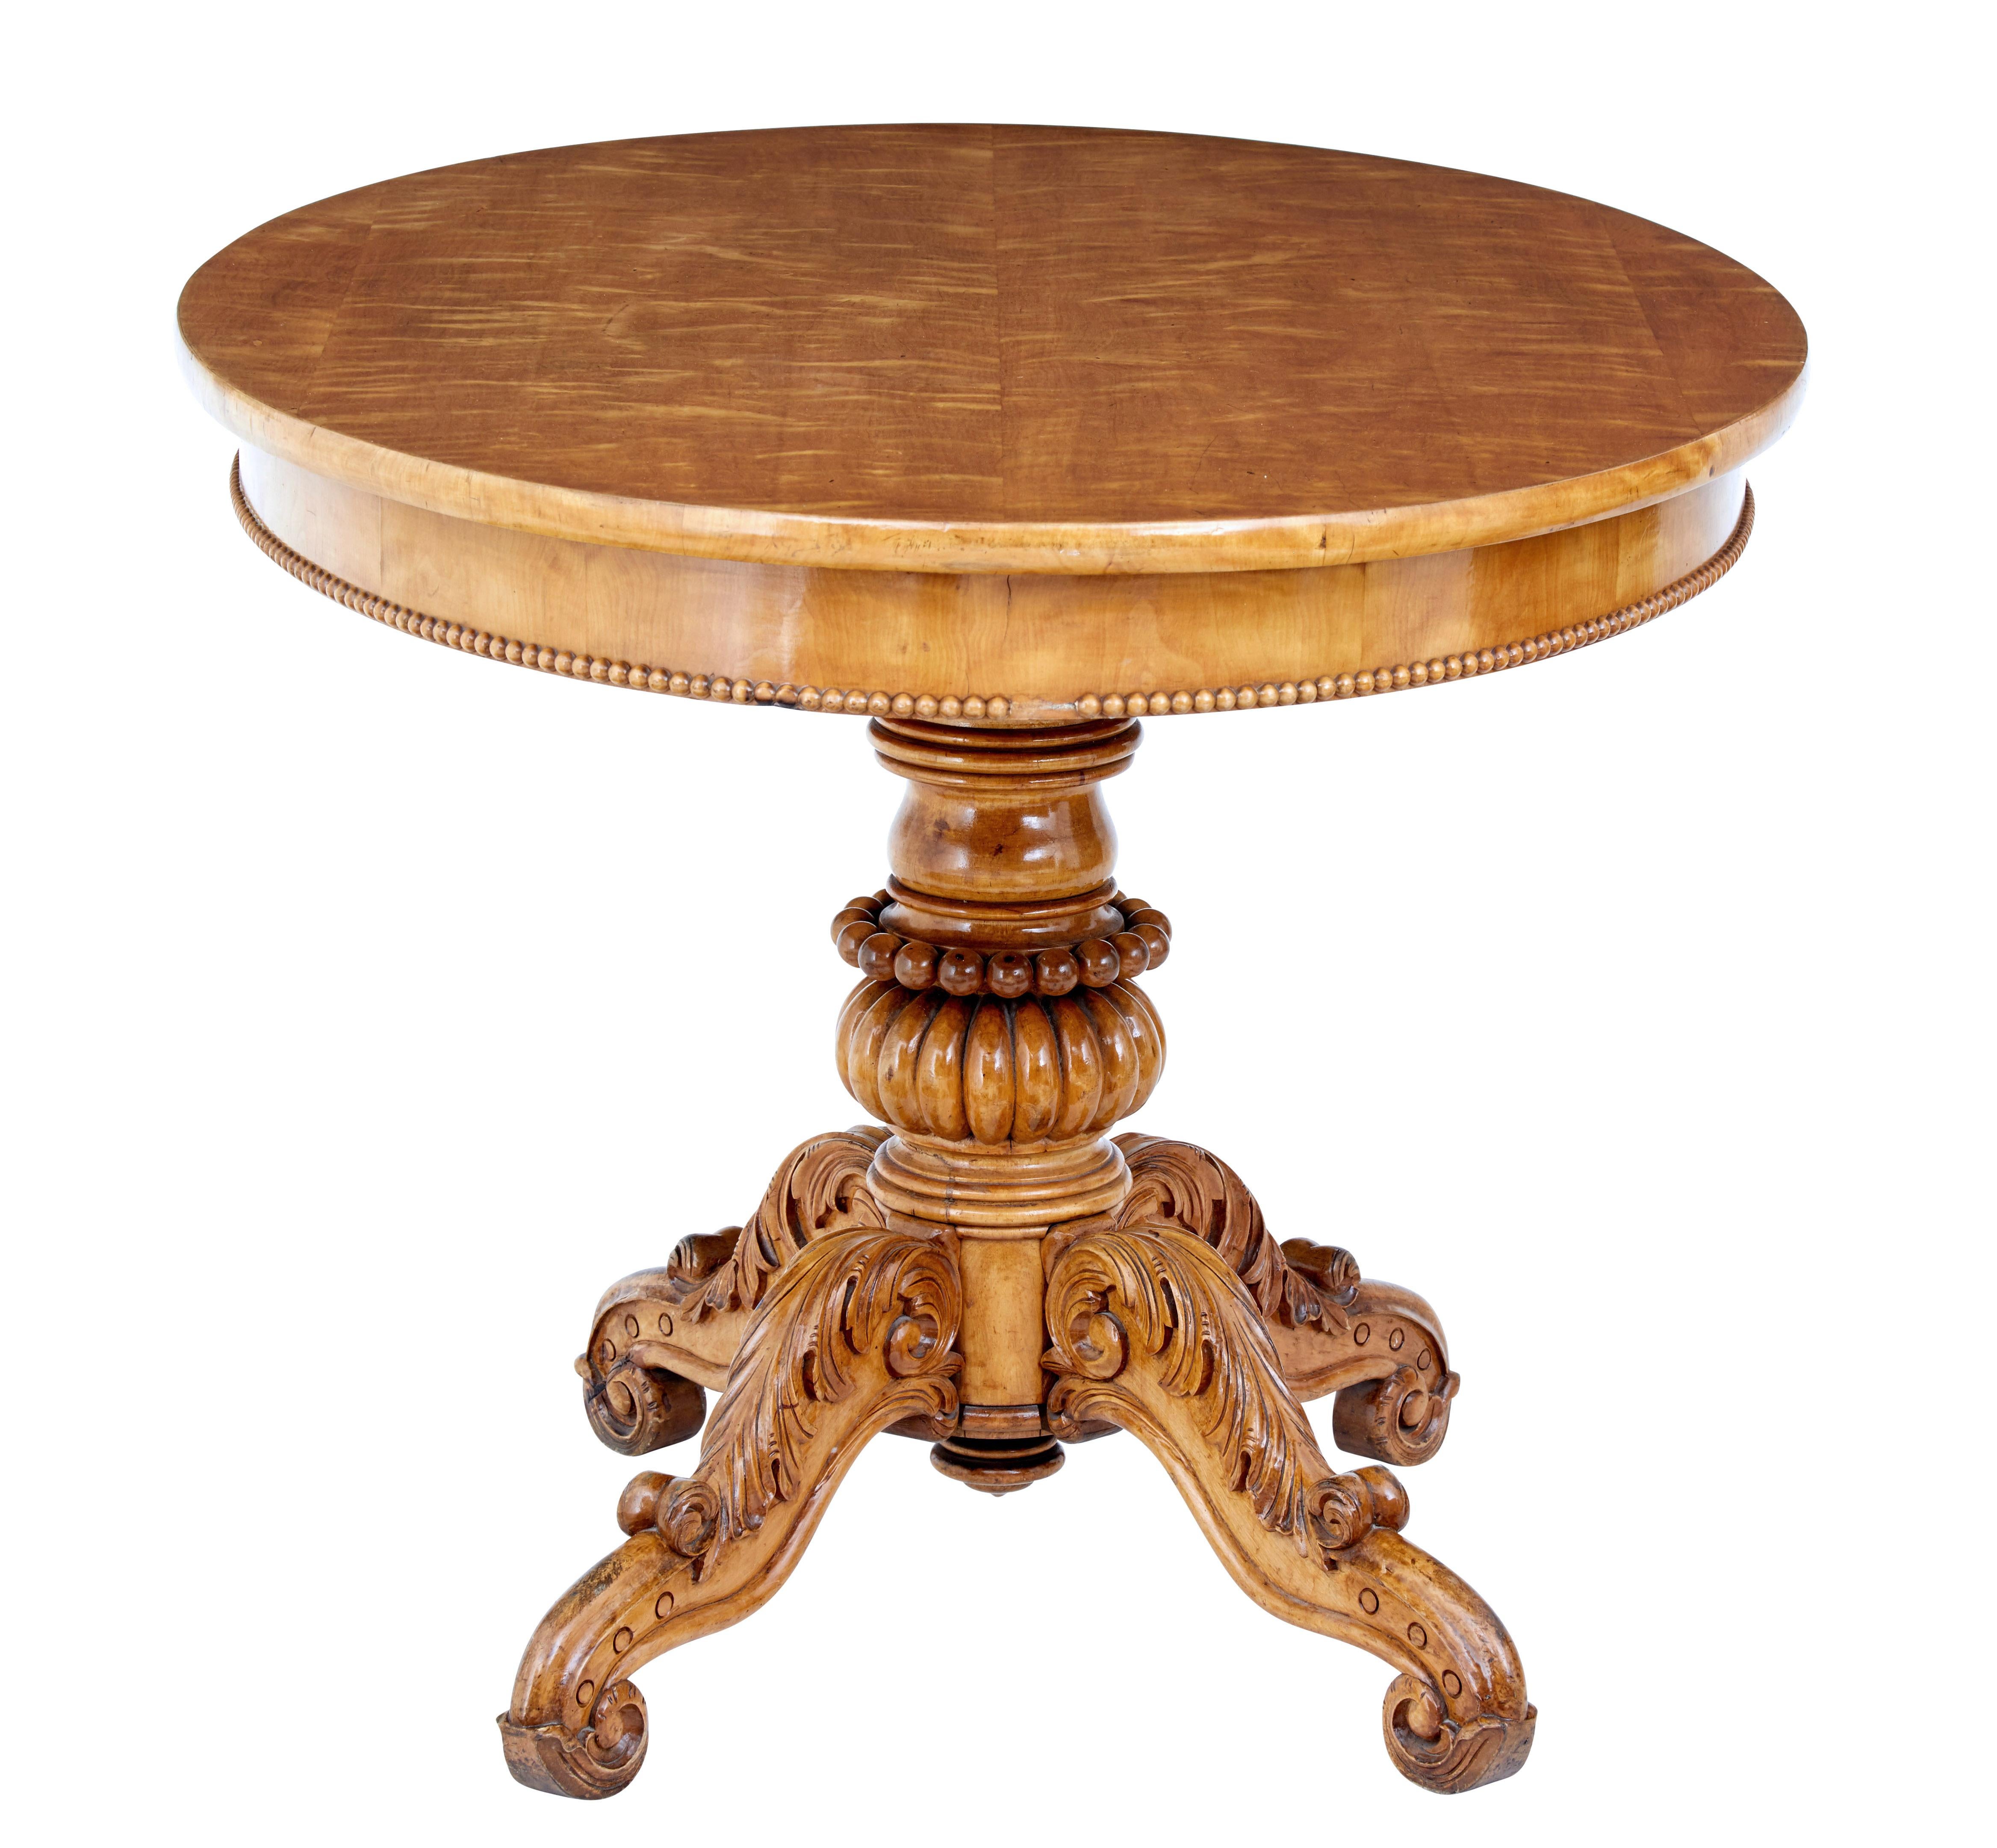 Decorative Swedish centre table of good proportions, circa 1870.

Simple large oval top with beaded edge to the frieze. Standing on a turned and carved stem with 4 profusely carved scrolling legs.

Rich golden color.

Light scratches to top